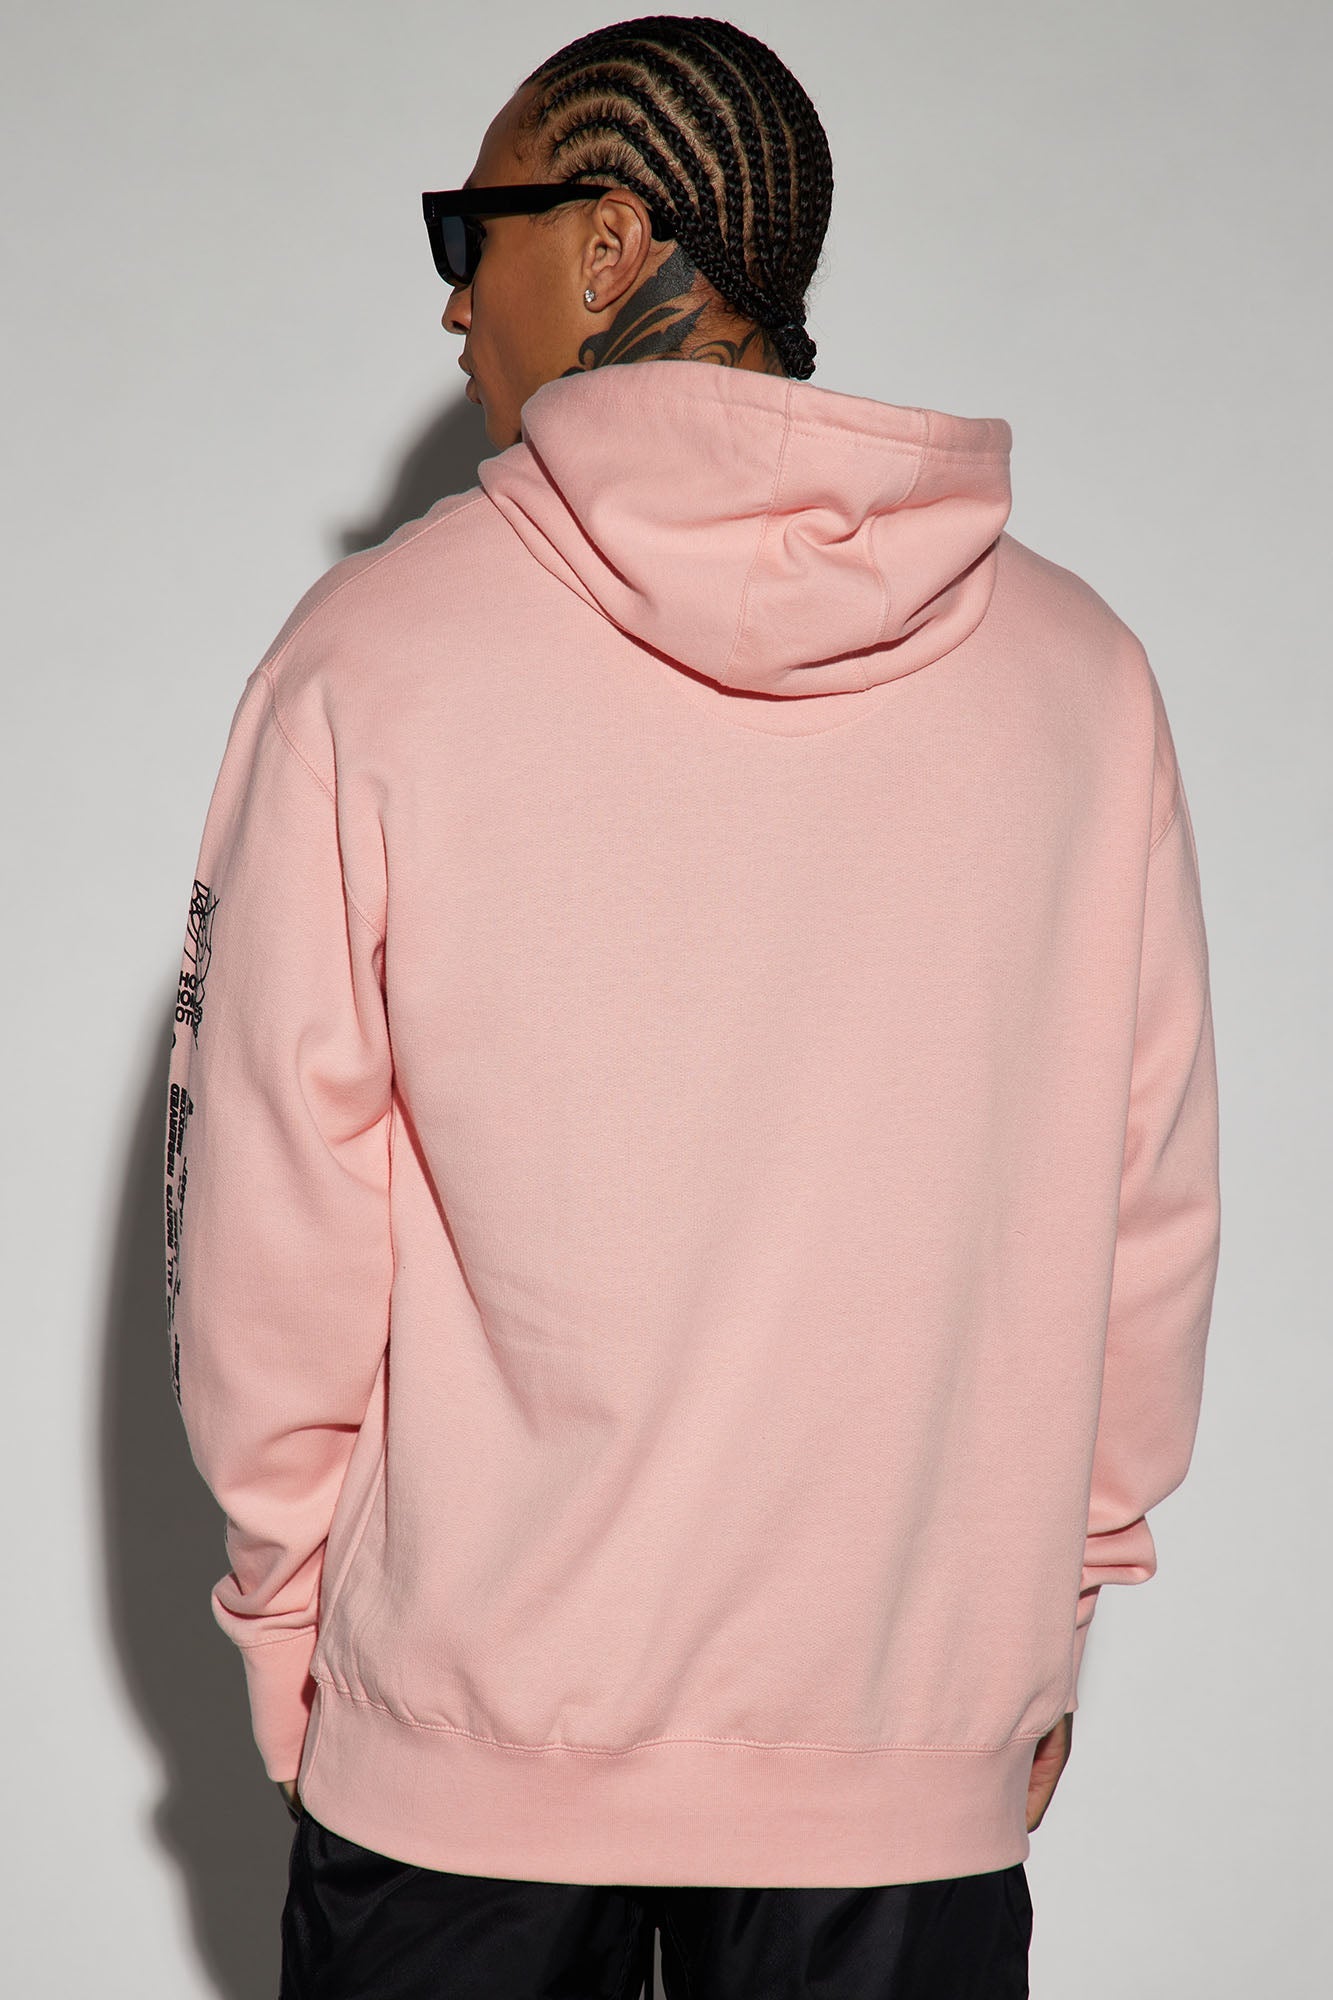 Empty Promises Hoodie in Pink: Stay Stylish and Cozy